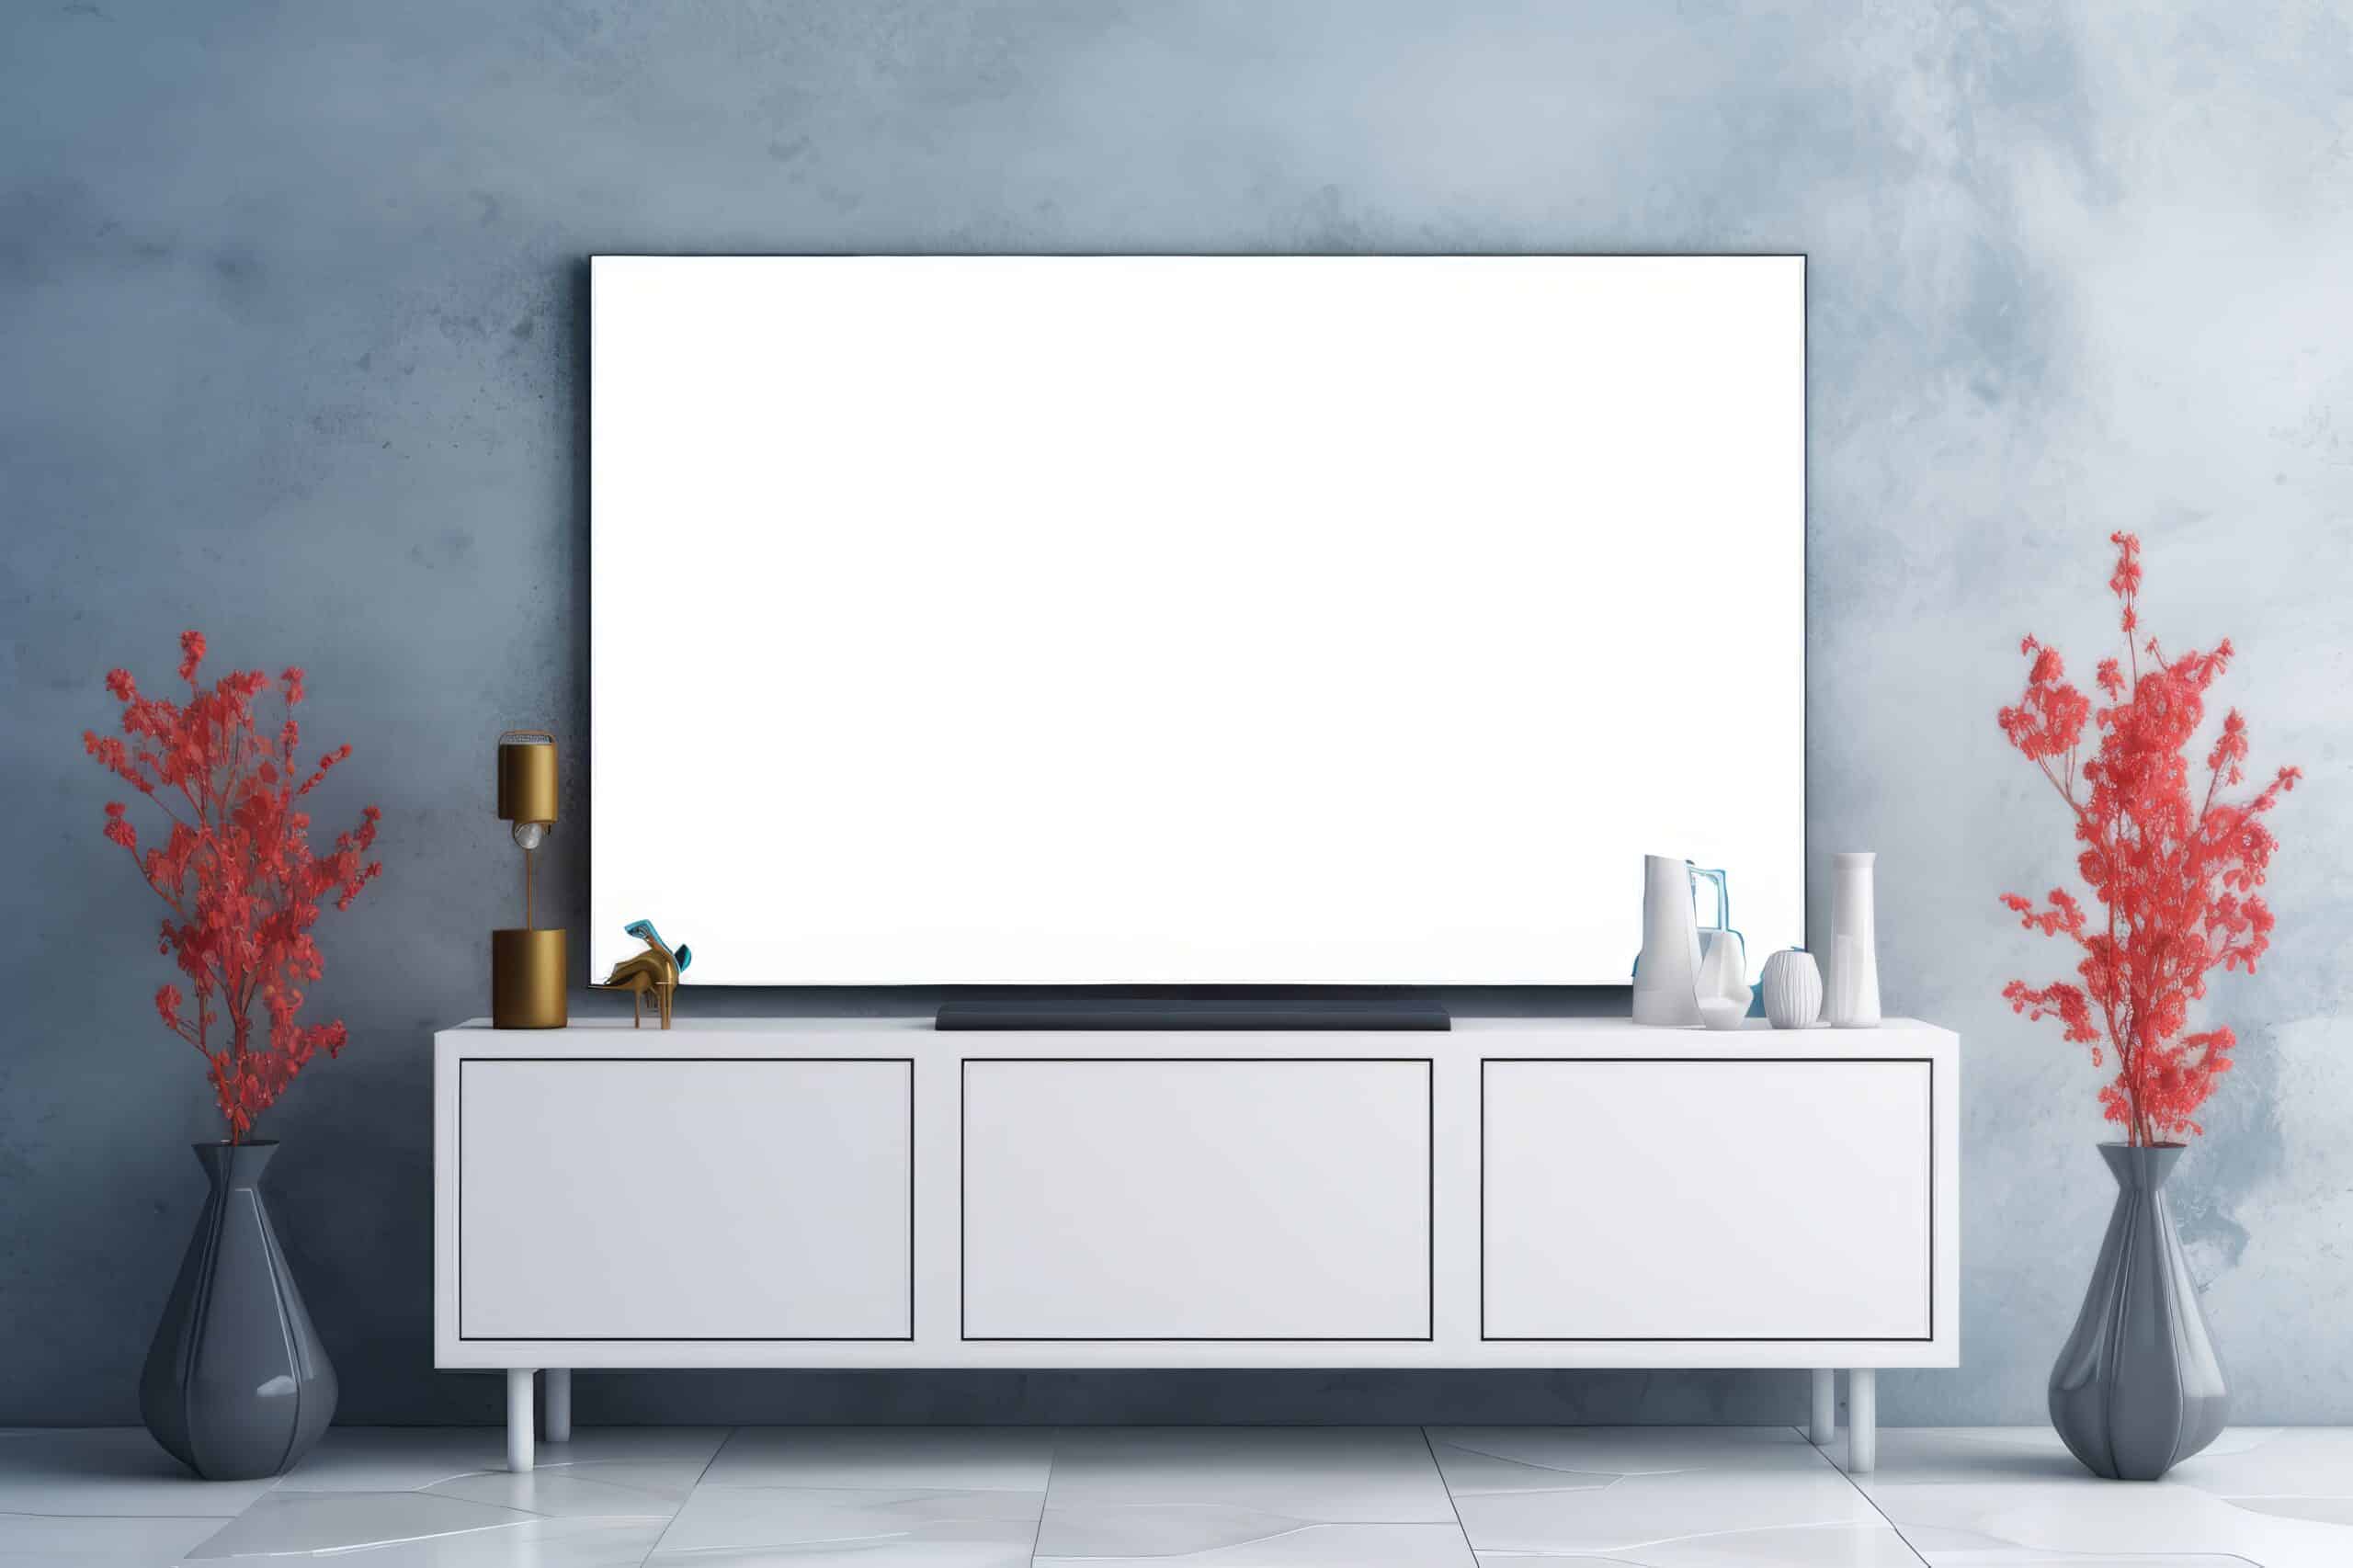 www.appr.com : How To Clean Smart TV Screen?